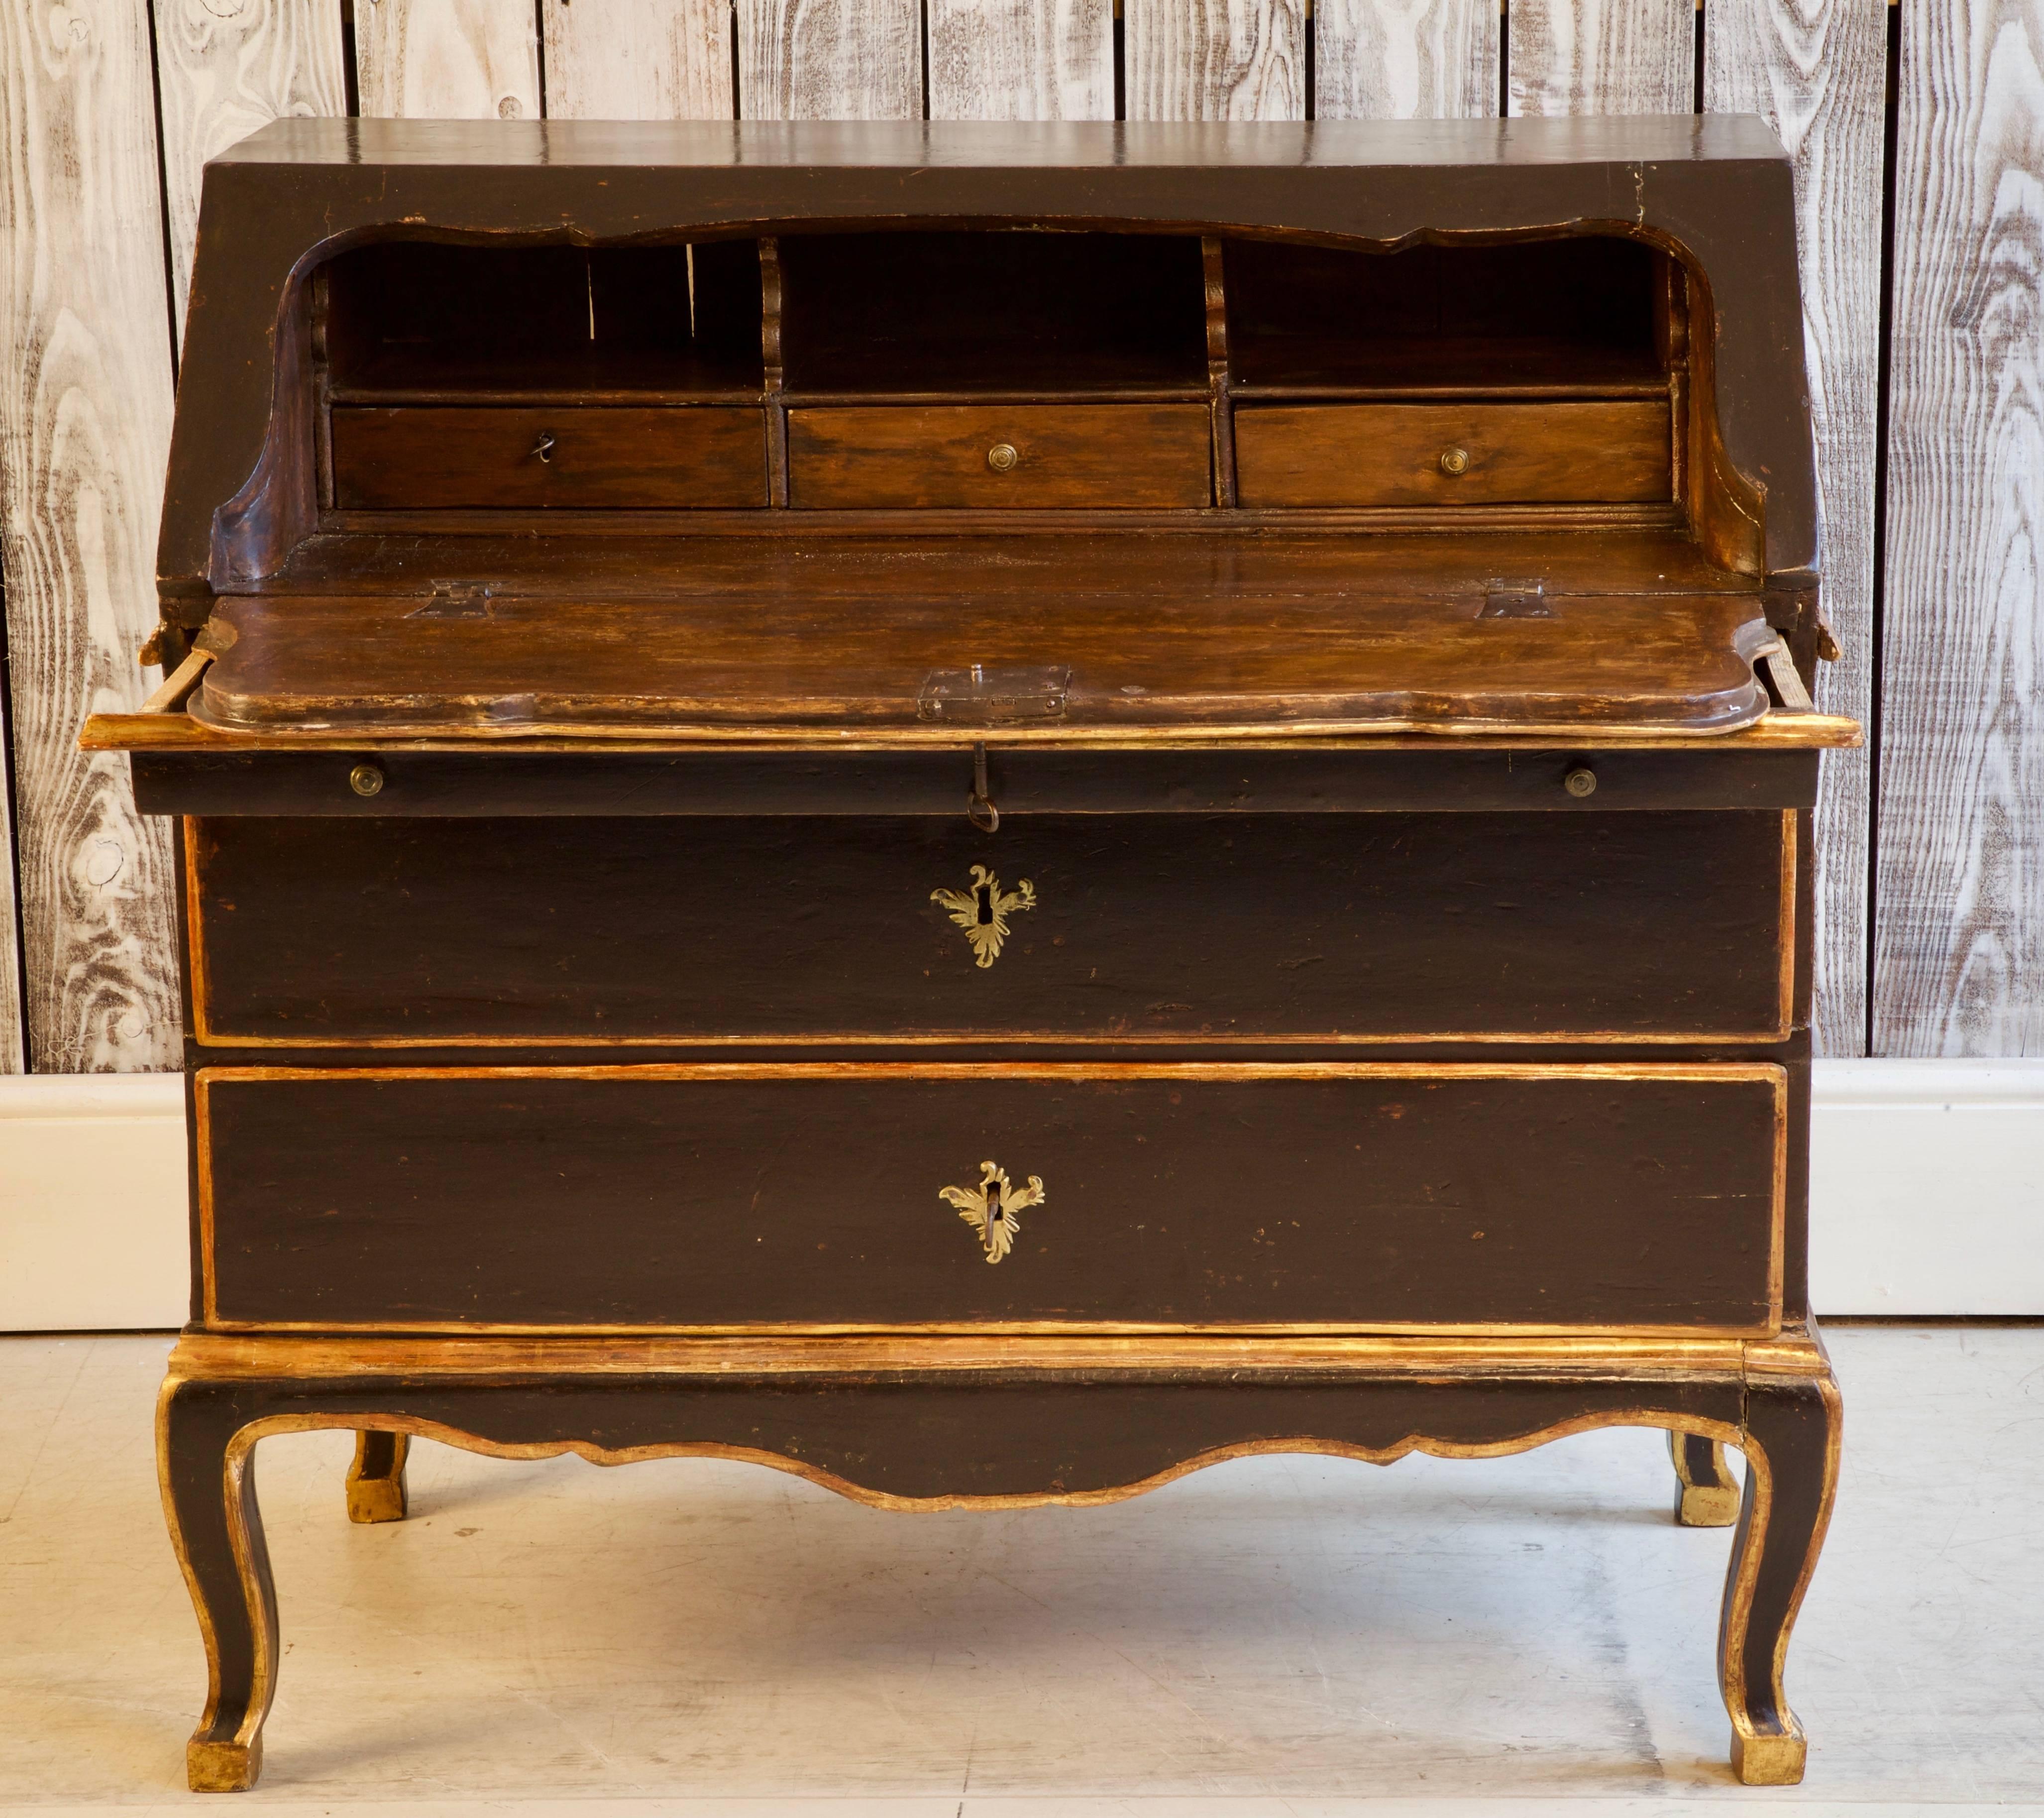 18th Century Italian scriban from Tuscany. Wax polished, walnut wood finish on the interior and a black lacquer patina with gilded highlights on the exterior. Complete with original ormolu fittings.